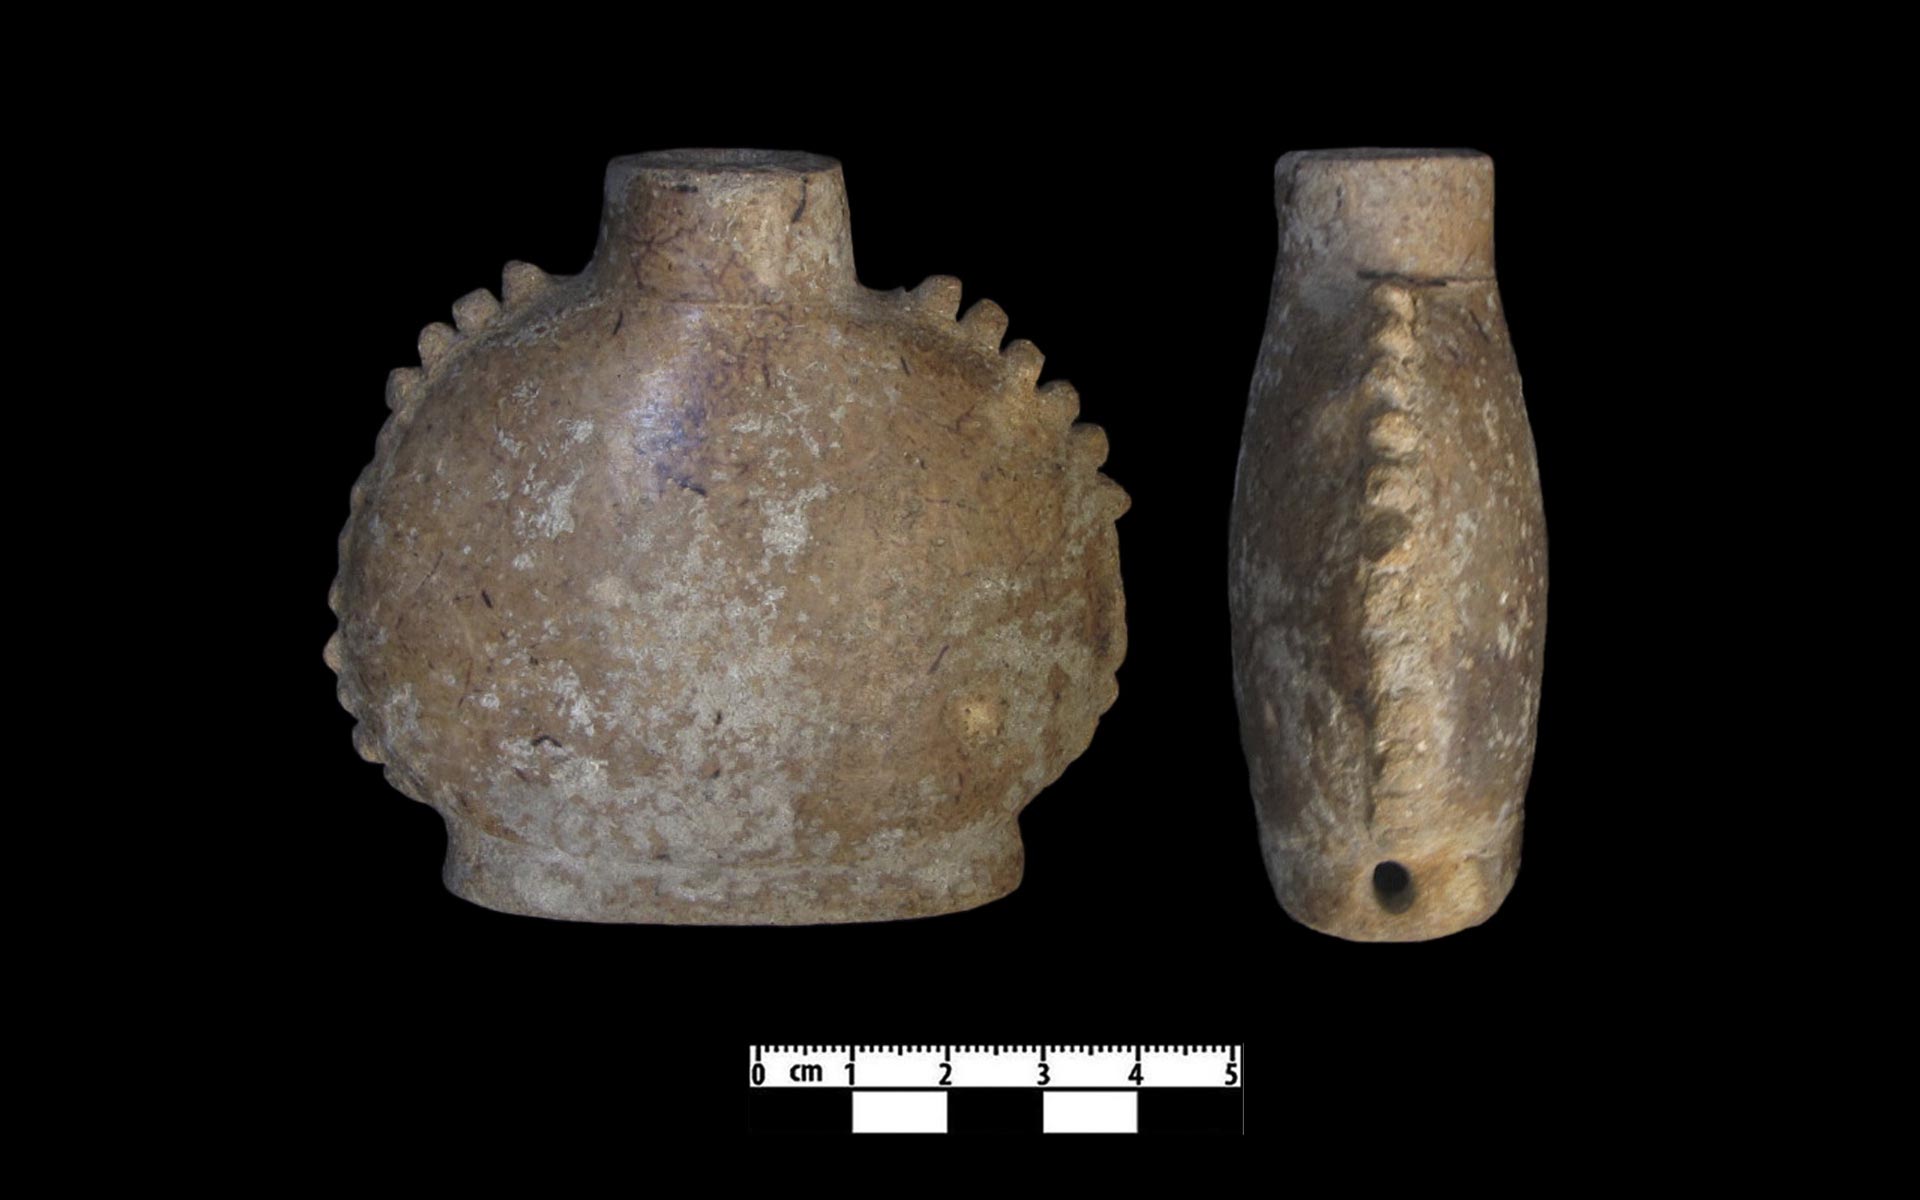 Scientists identify the contents of ancient Mayan drug containers